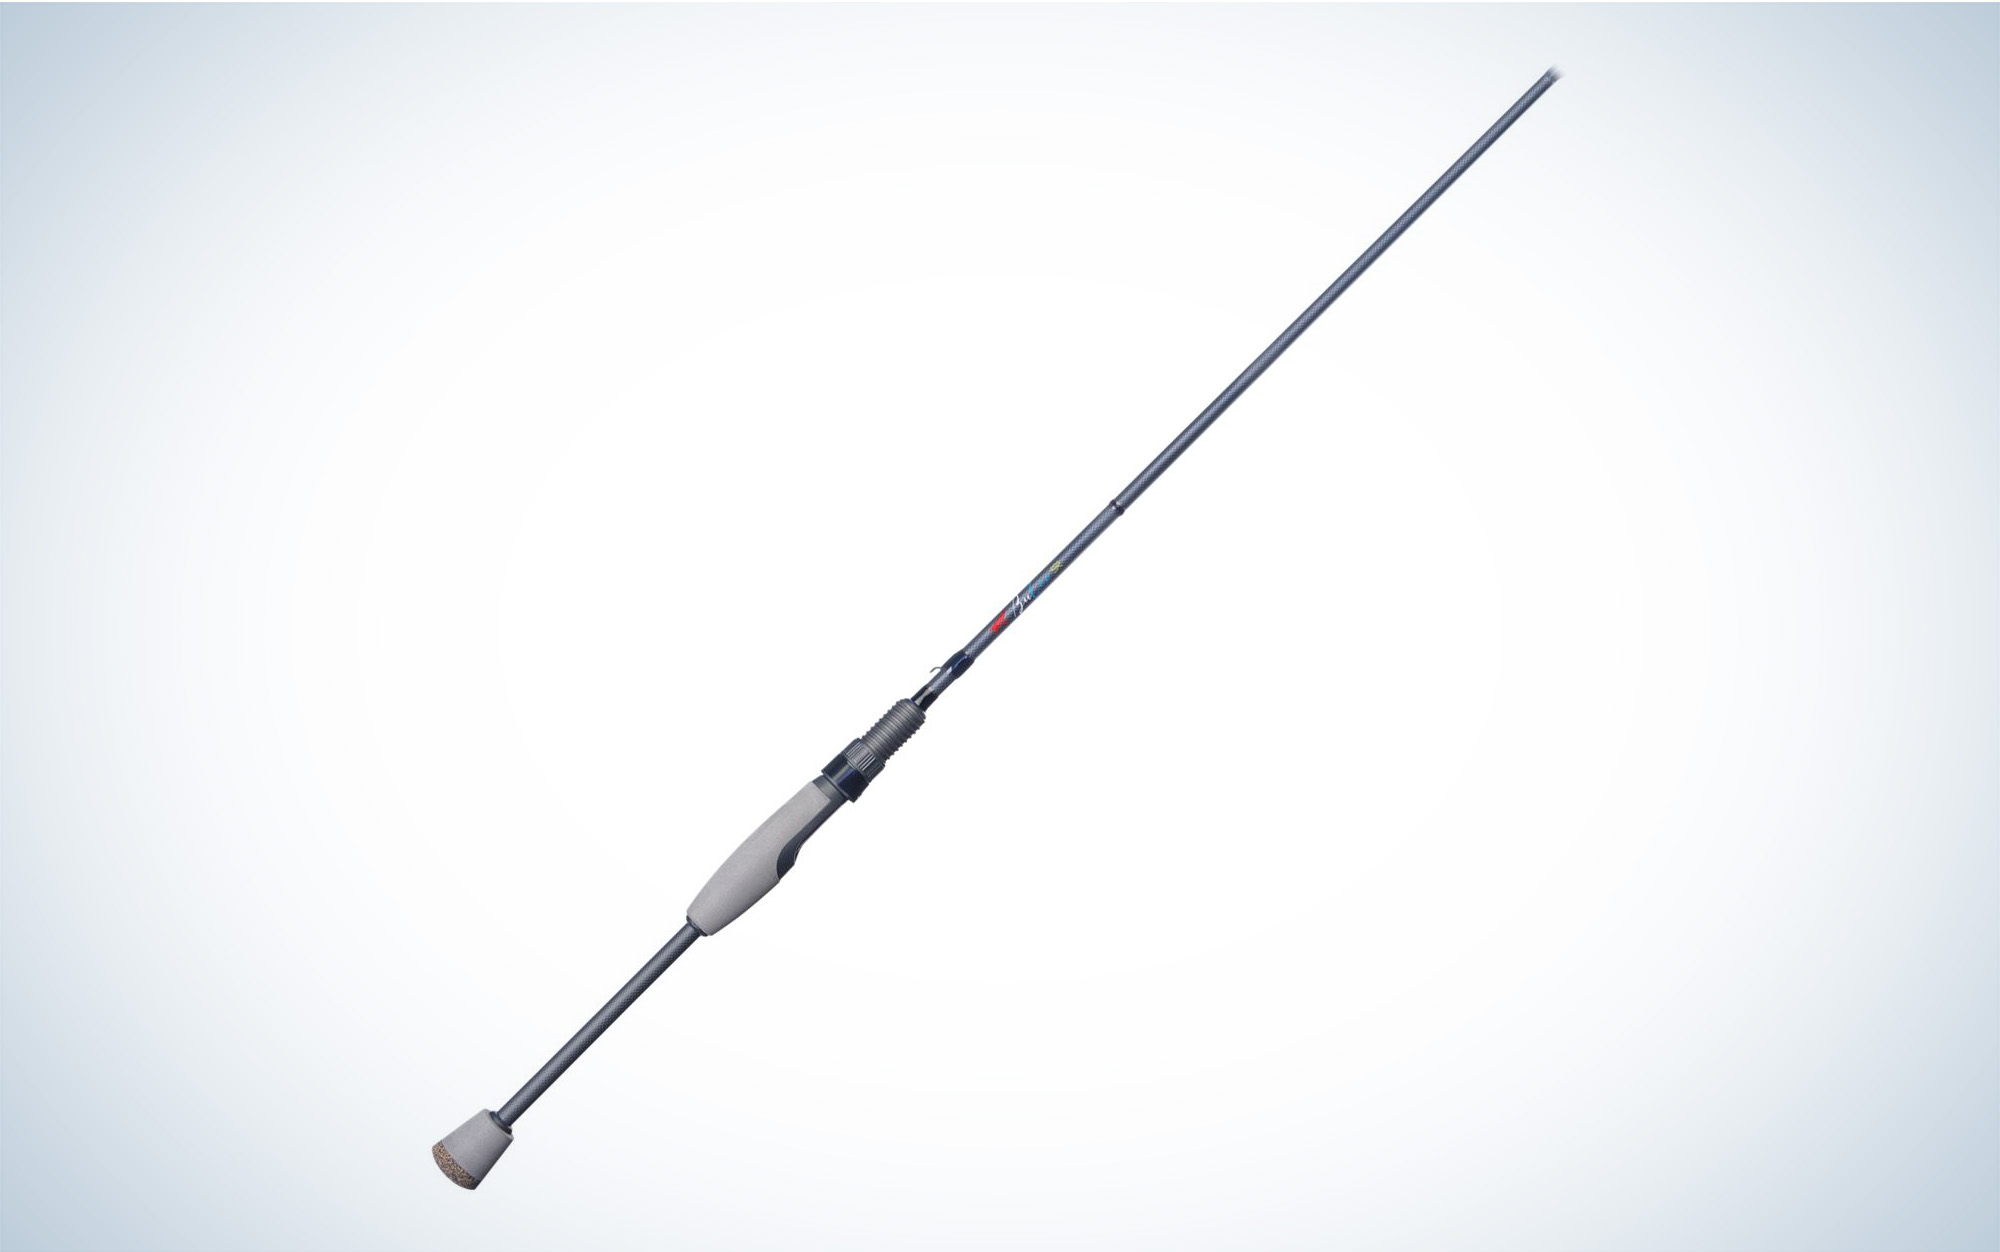 The Falcon BuCoo SR is the best spinning rod for the money.